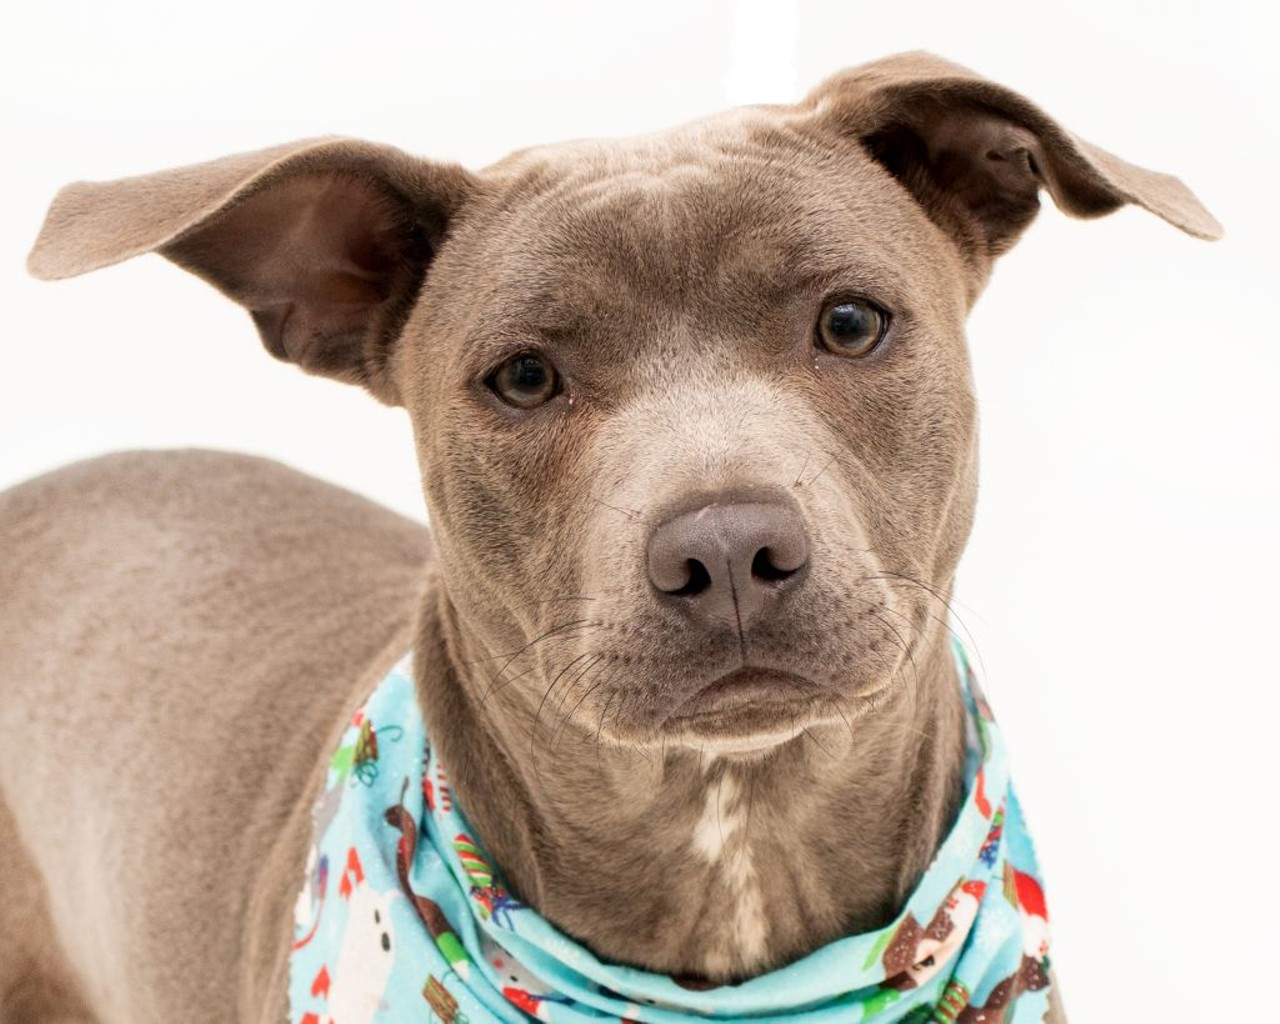 18 adoptable pups looking for a new home in Orange County this Christmas